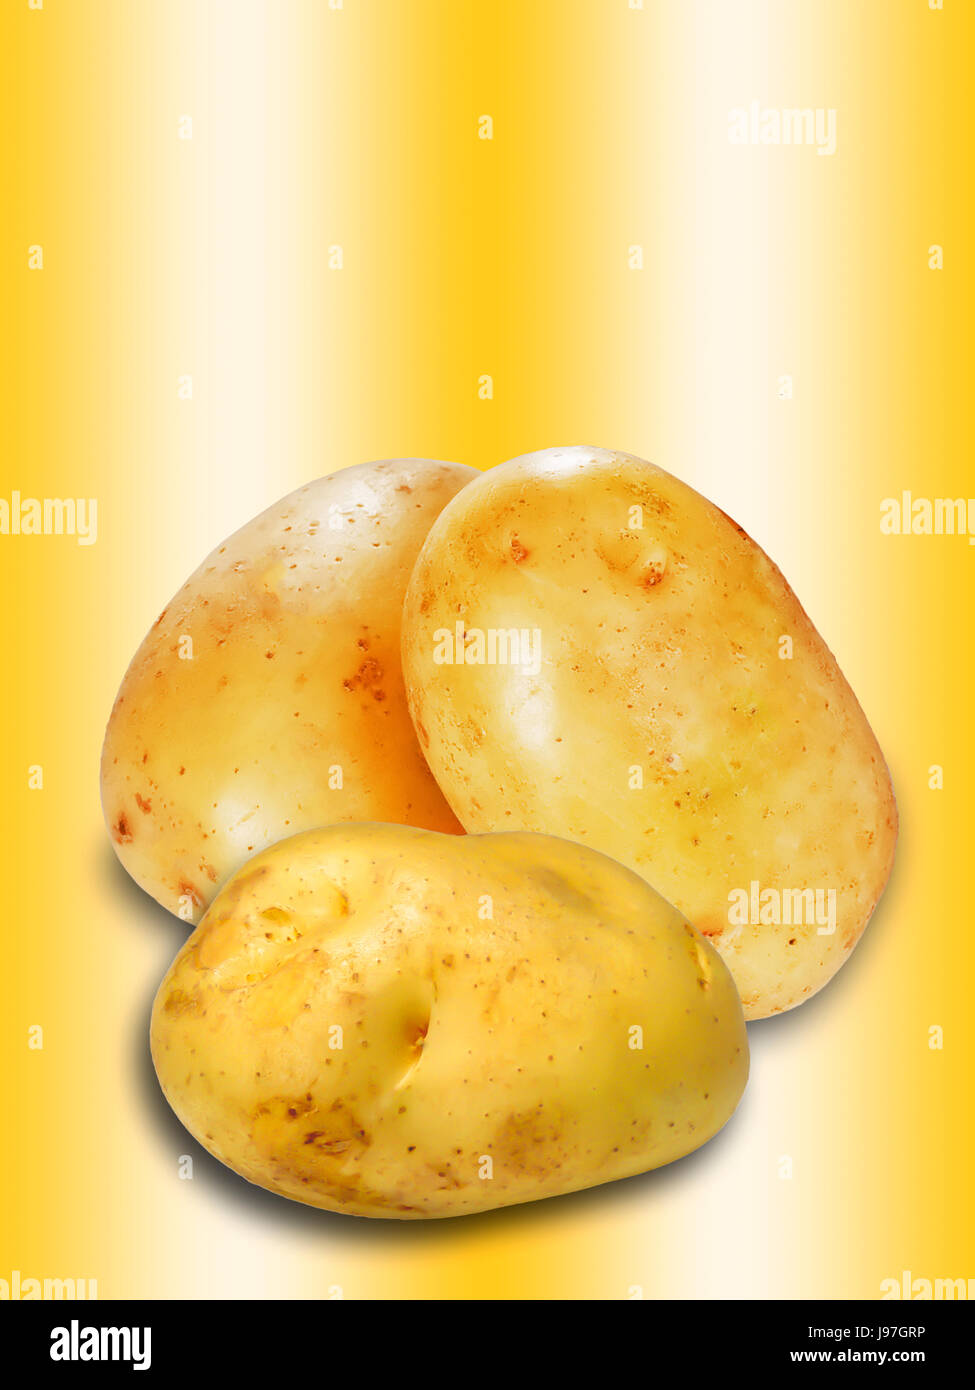 Fresh uncooked potato isolated against the golden colored background Stock Photo